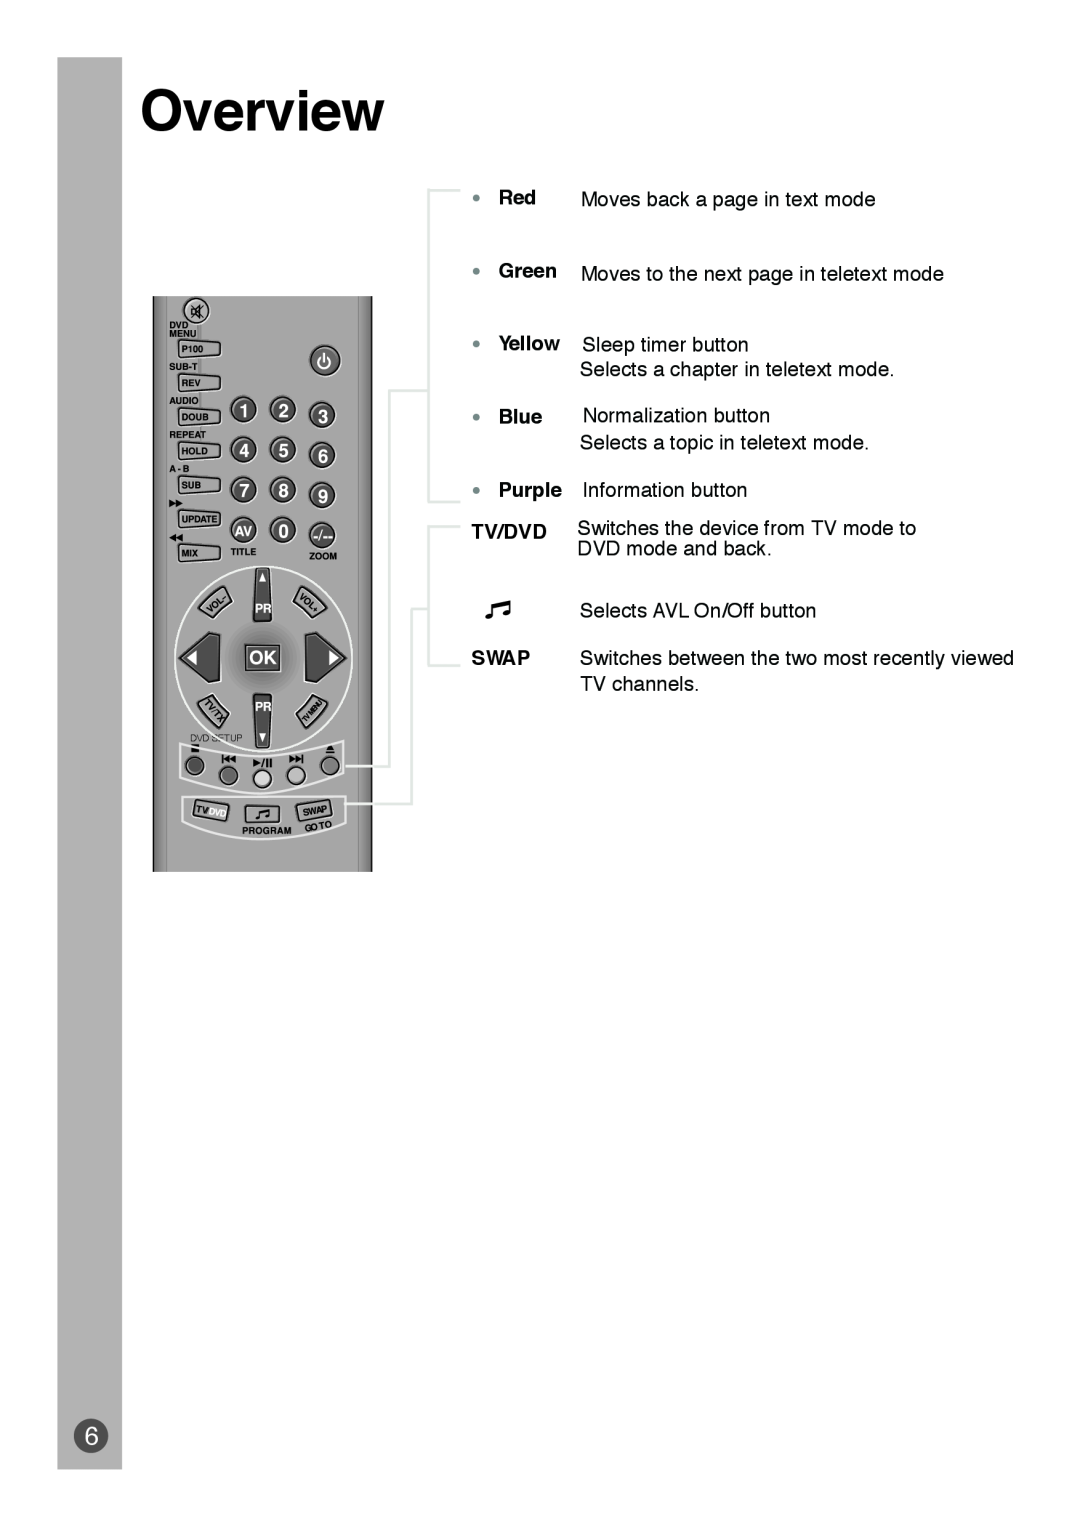 Beko E5 manual Overview, Red Moves back a page in text mode, Green Moves to the next page in teletext mode, Dvd Setup 